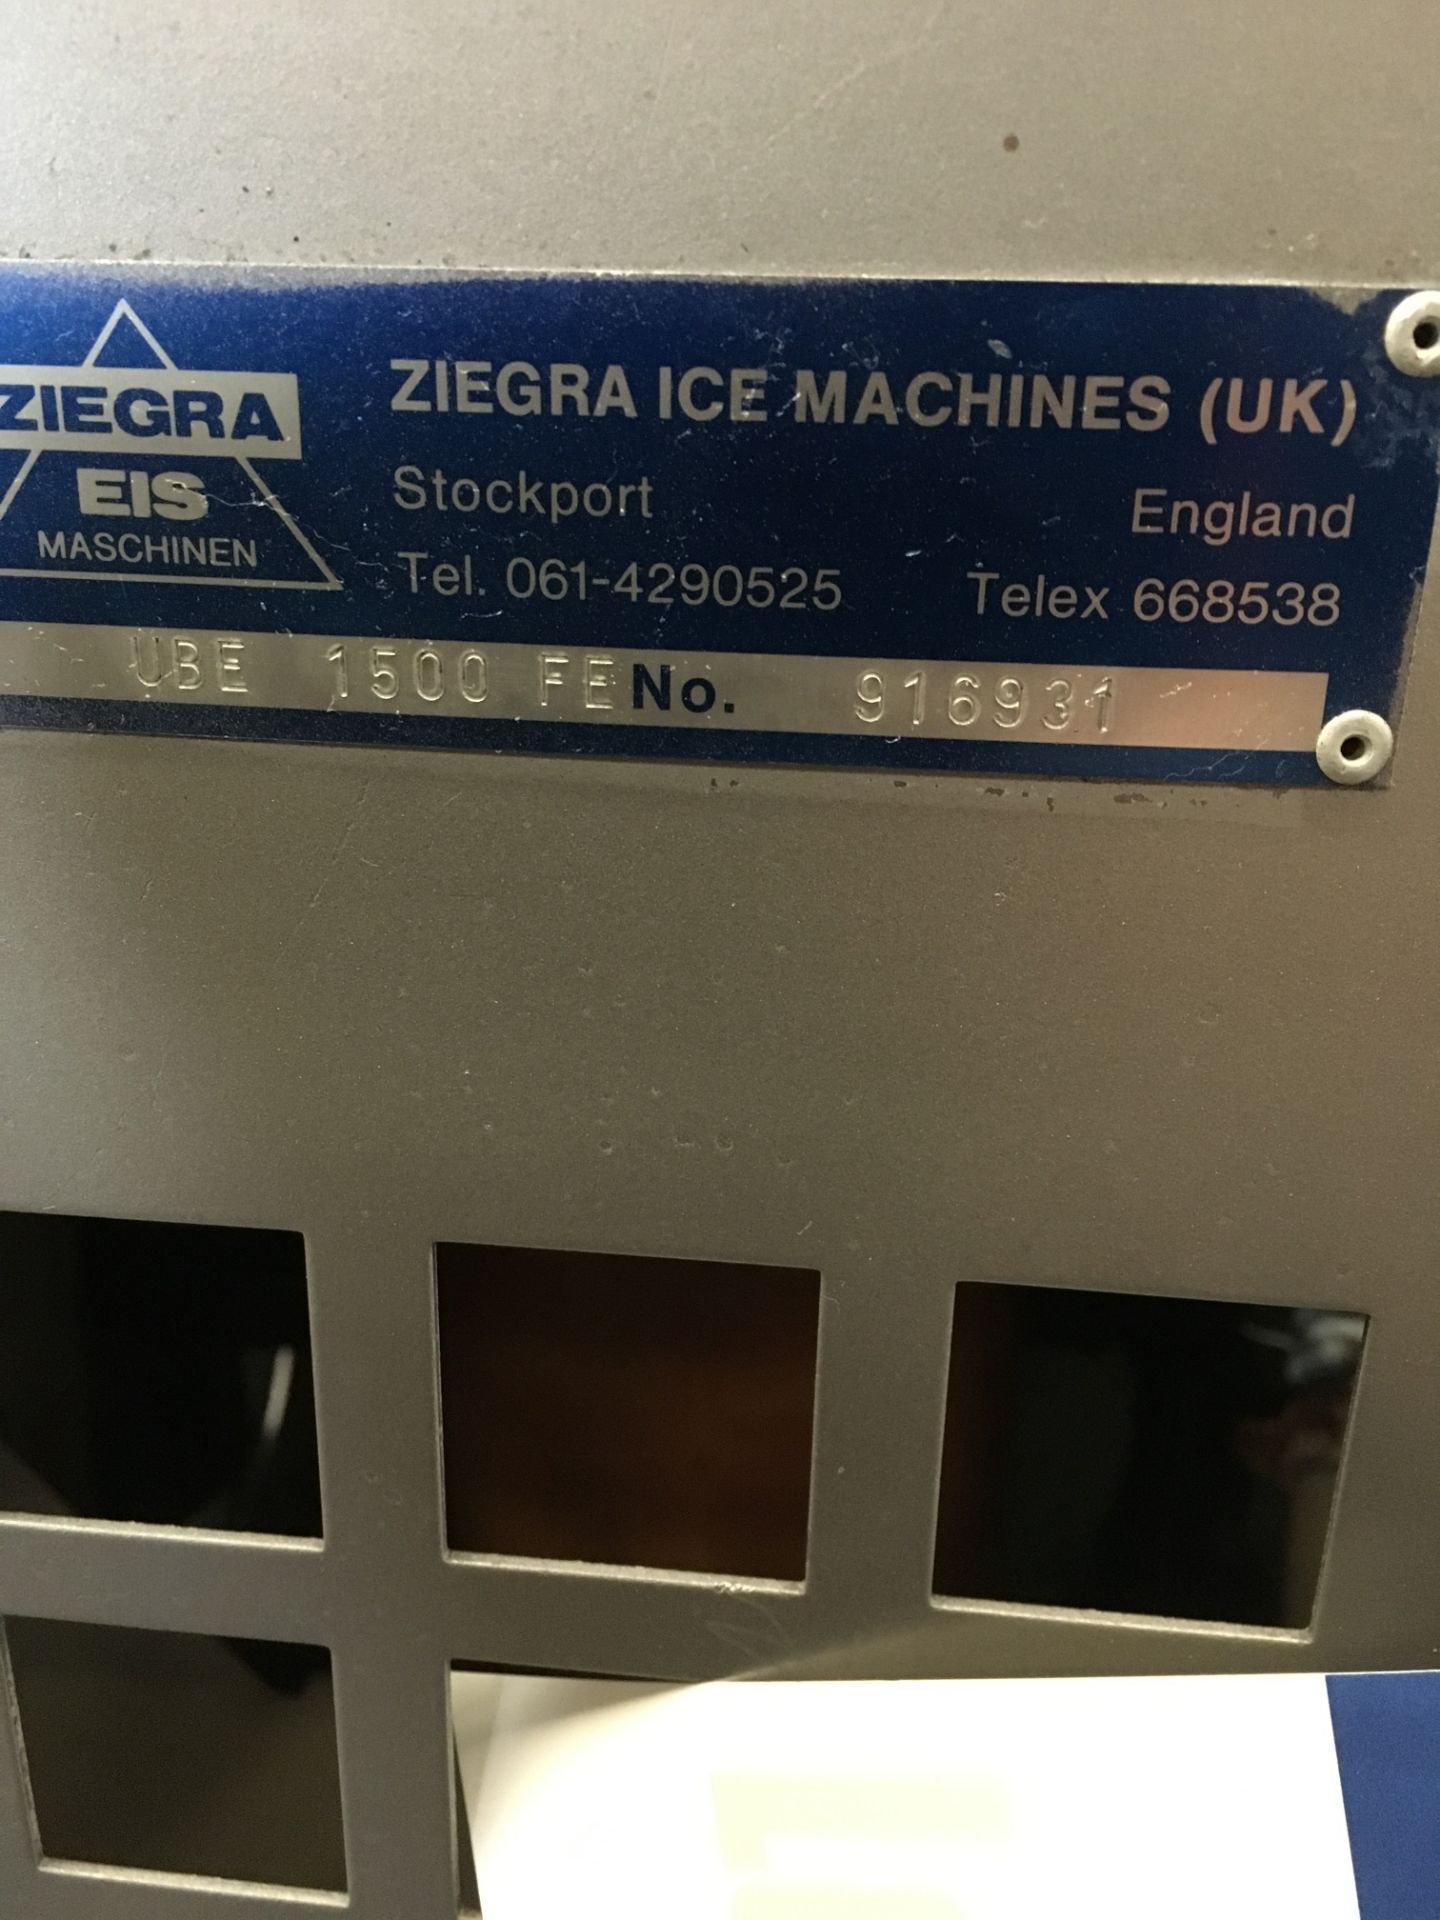 Ziegra UBE 1500FE Ice Flaking Machine, serial no. 916931, approx. 800mm x 1000mm x 1420mm high, £ - Image 2 of 2